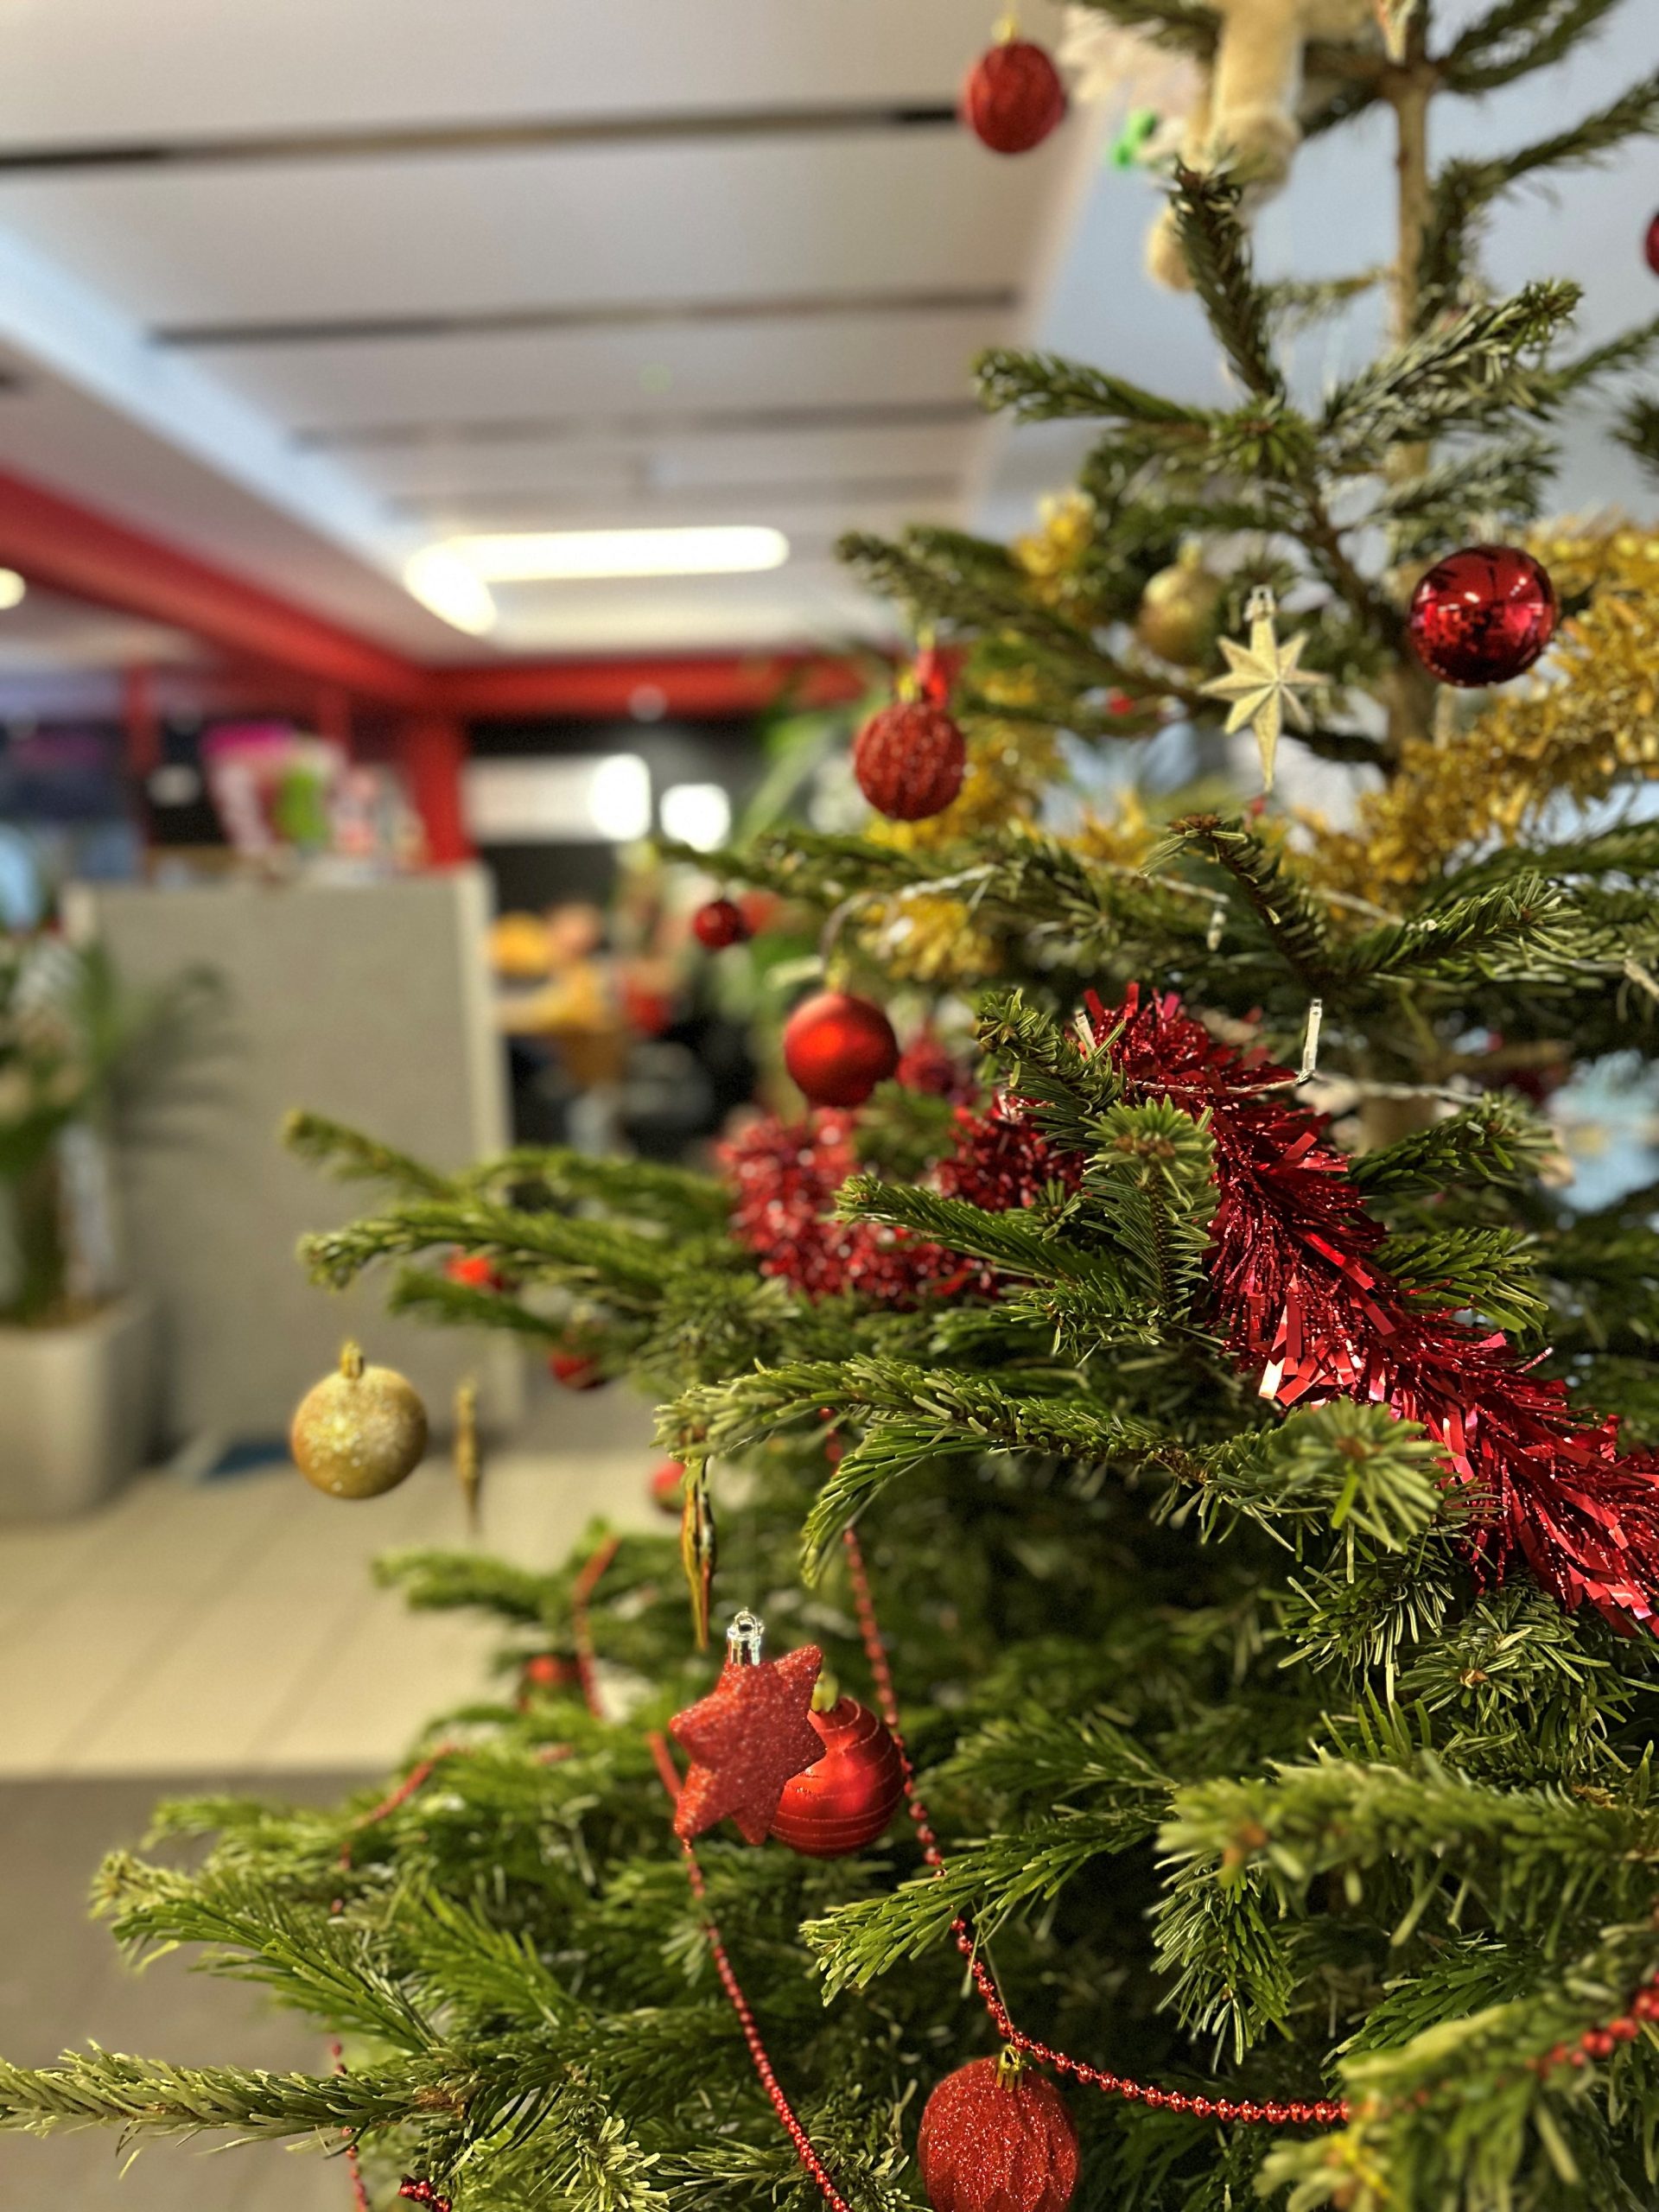 Christmas at the Rapid Re-accommodation Welcome Centre